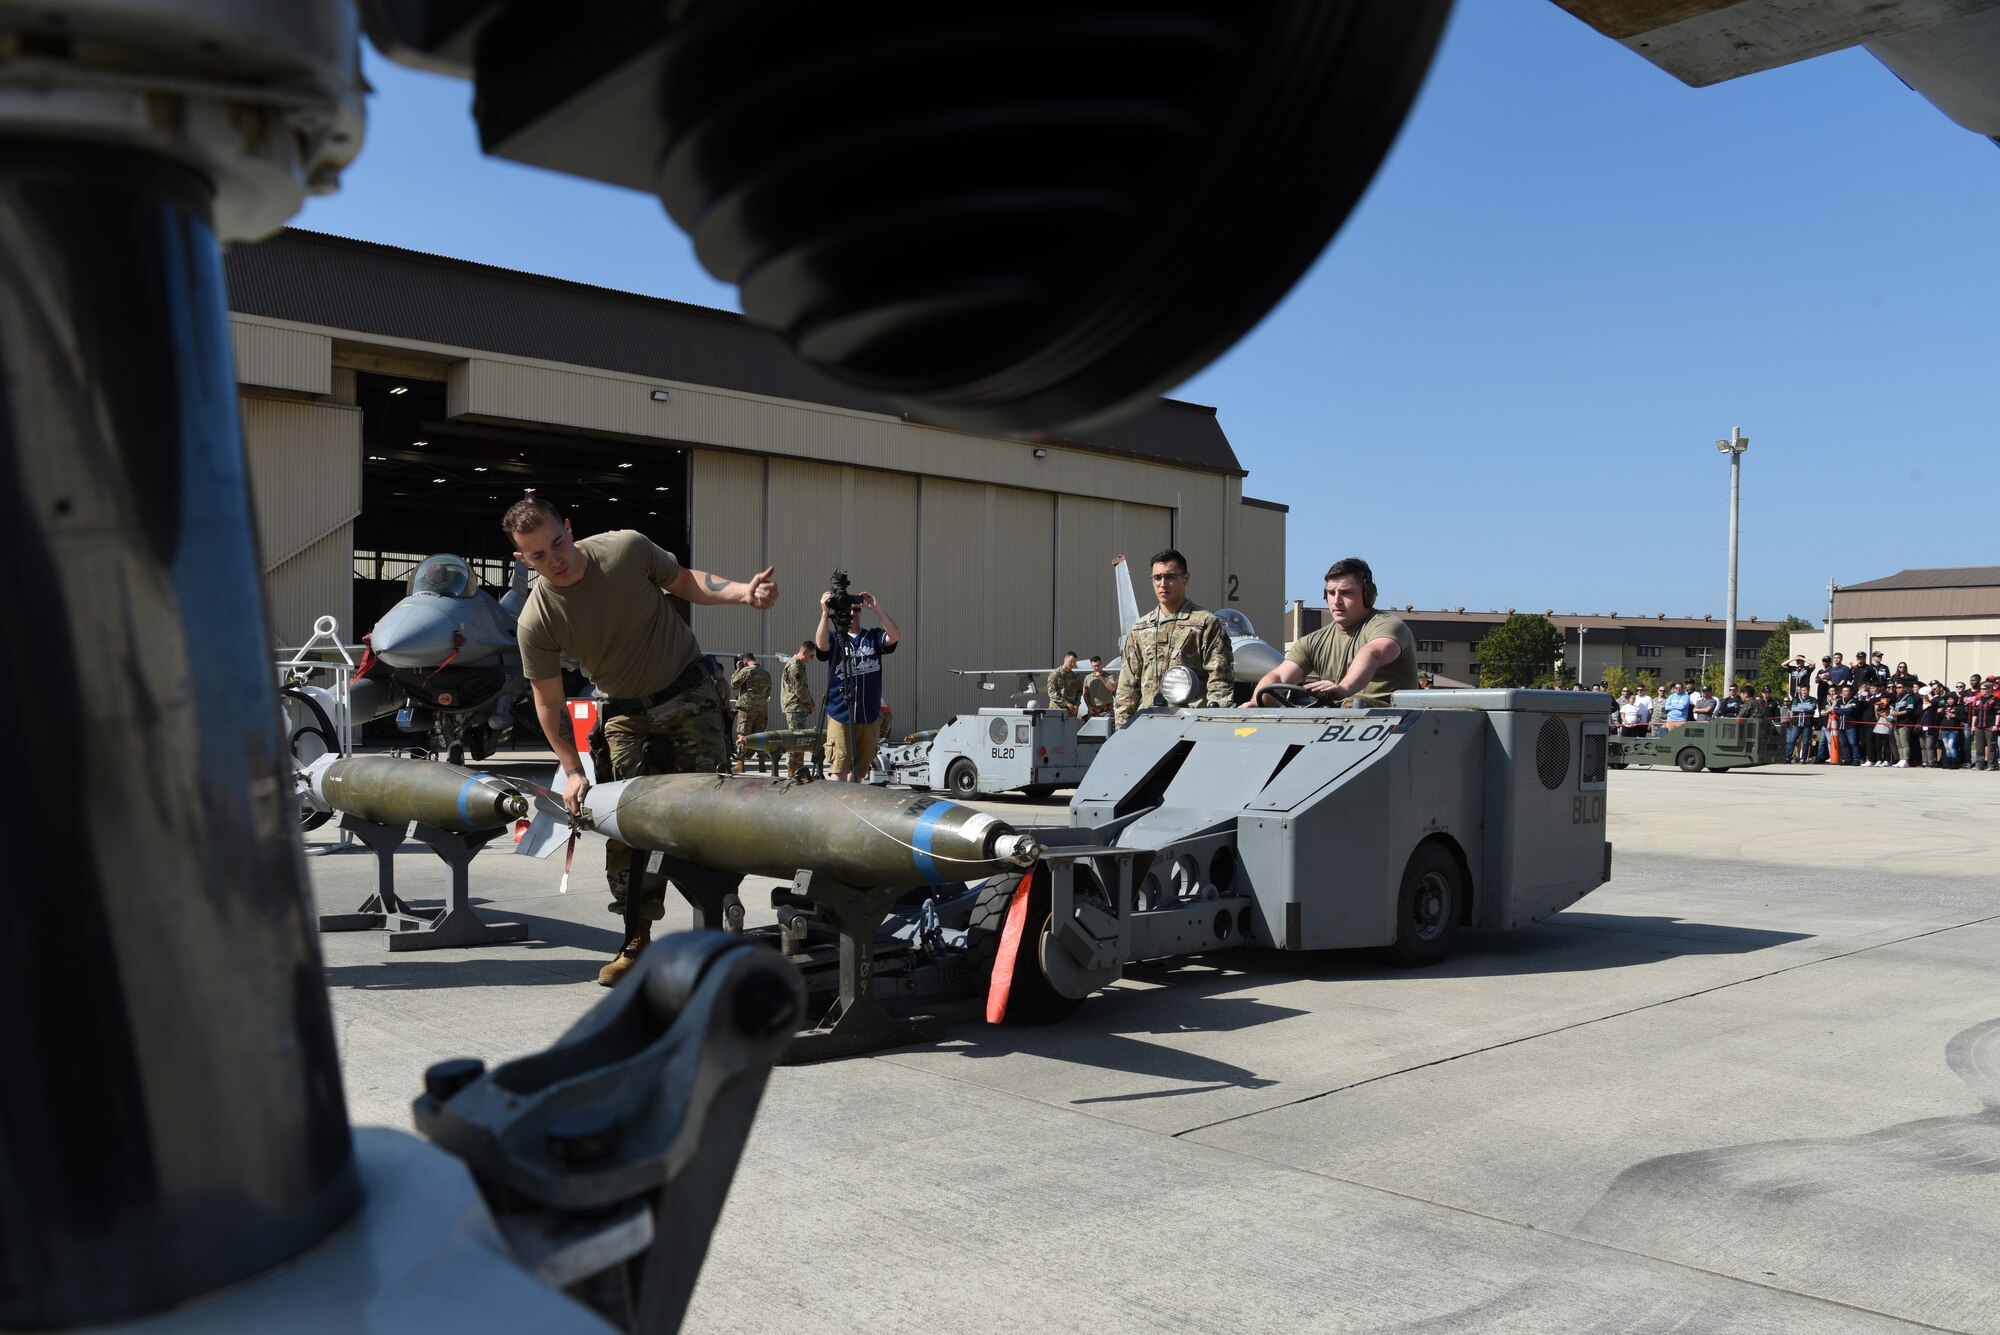 Members of the 36th Aircraft Maintenance Unit, Osan Air Base, Republic of Korea, load a bomb onto an F-16 Fighting Falcon aircraft during the 2019 Penn Fest competition at Kunsan Air Base, ROK, Oct. 19, 2019. The 38th FG AMU competed against four U.S. Air Force teams and completed their loads with the second quickest times. (U.S. Air Force photo by Staff Sgt. Joshua Edwards)